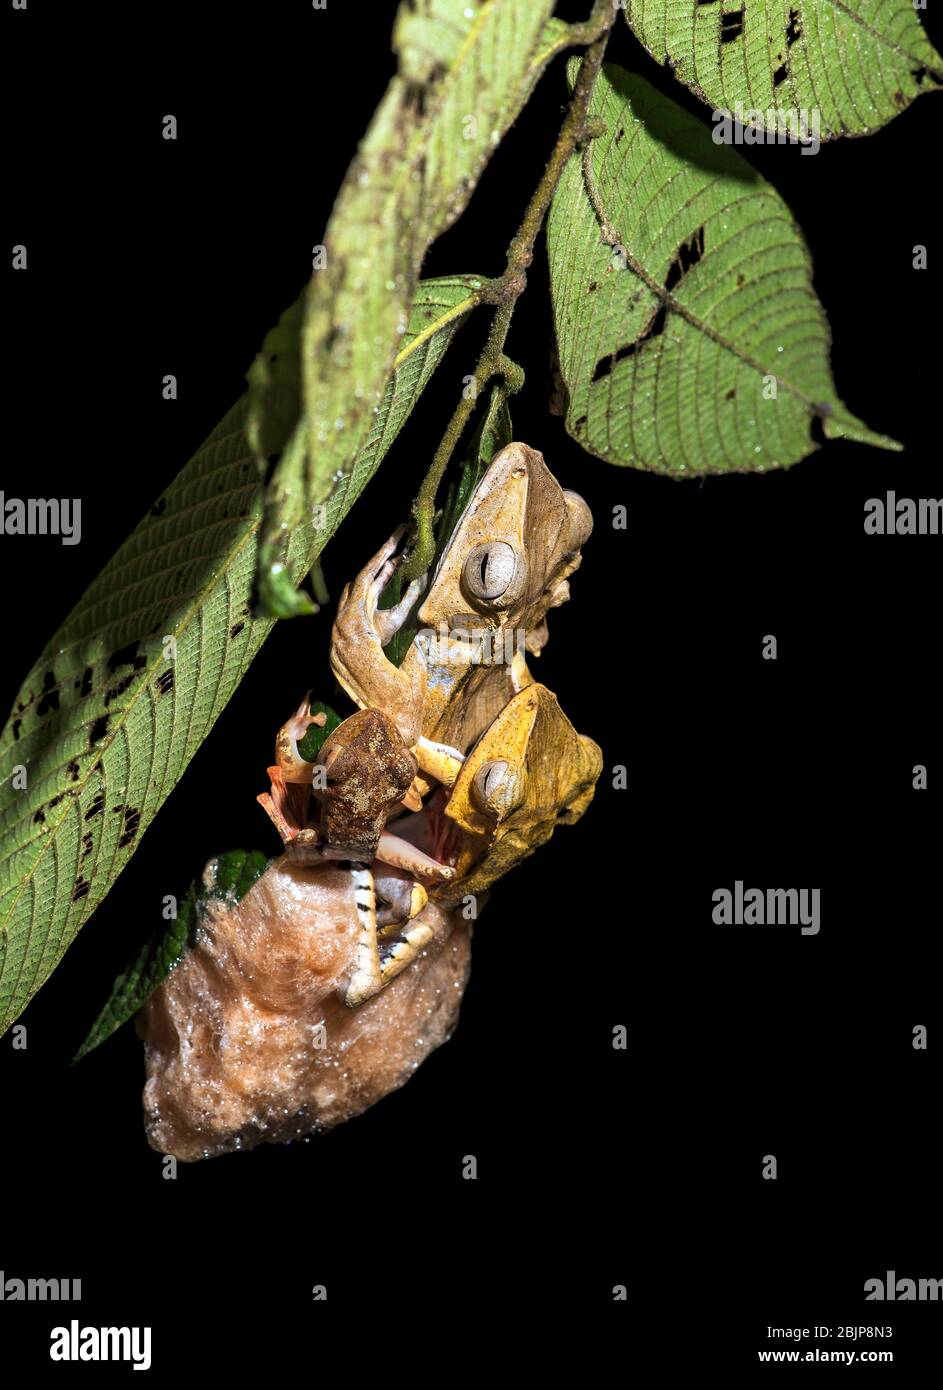 Foam nest being made by a pair of File-eared Tree Frog (Polypedates otilophus) in amplexus, Kubah National Park, Kuching, Sarawak, Borneo, Malaysia Stock Photo